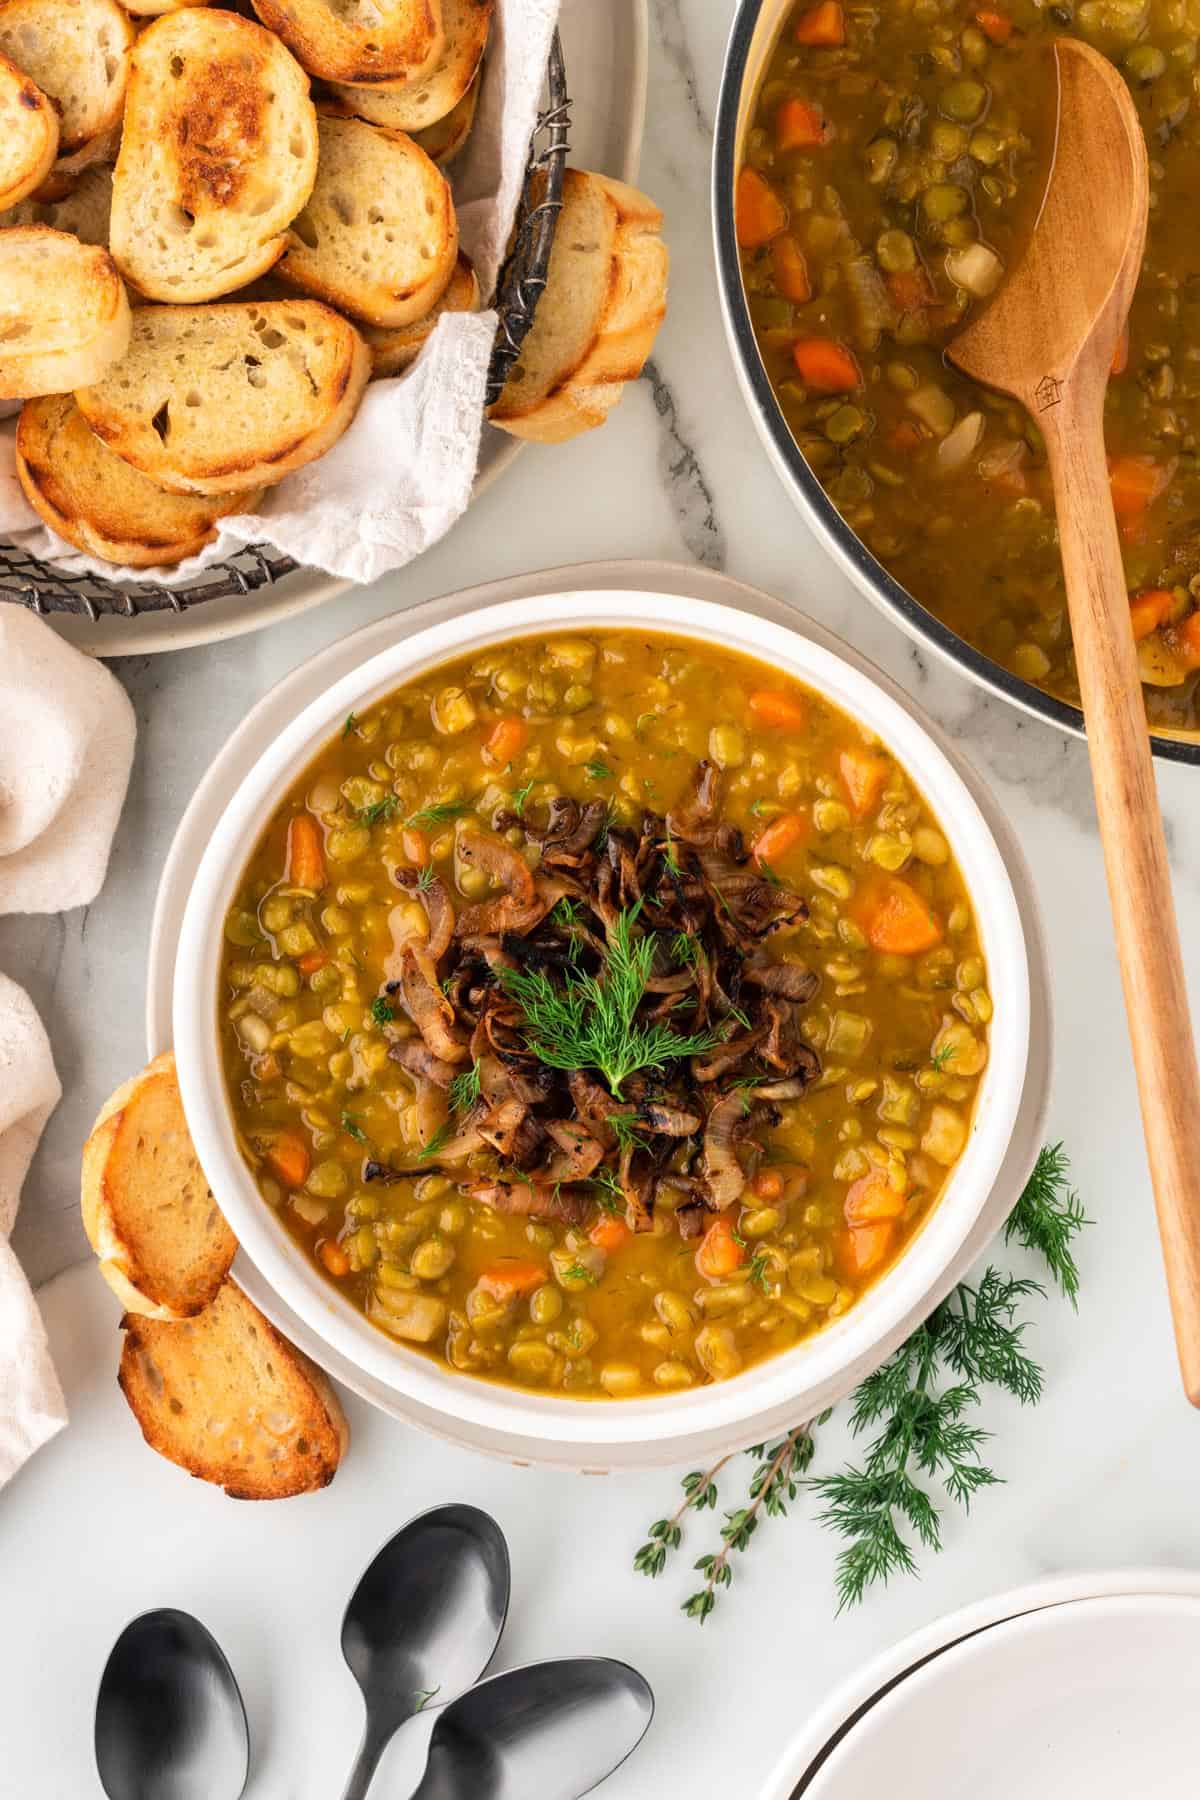 A photo of a bowl of vegetarian split pea soup with bread slices and spoons next to it.